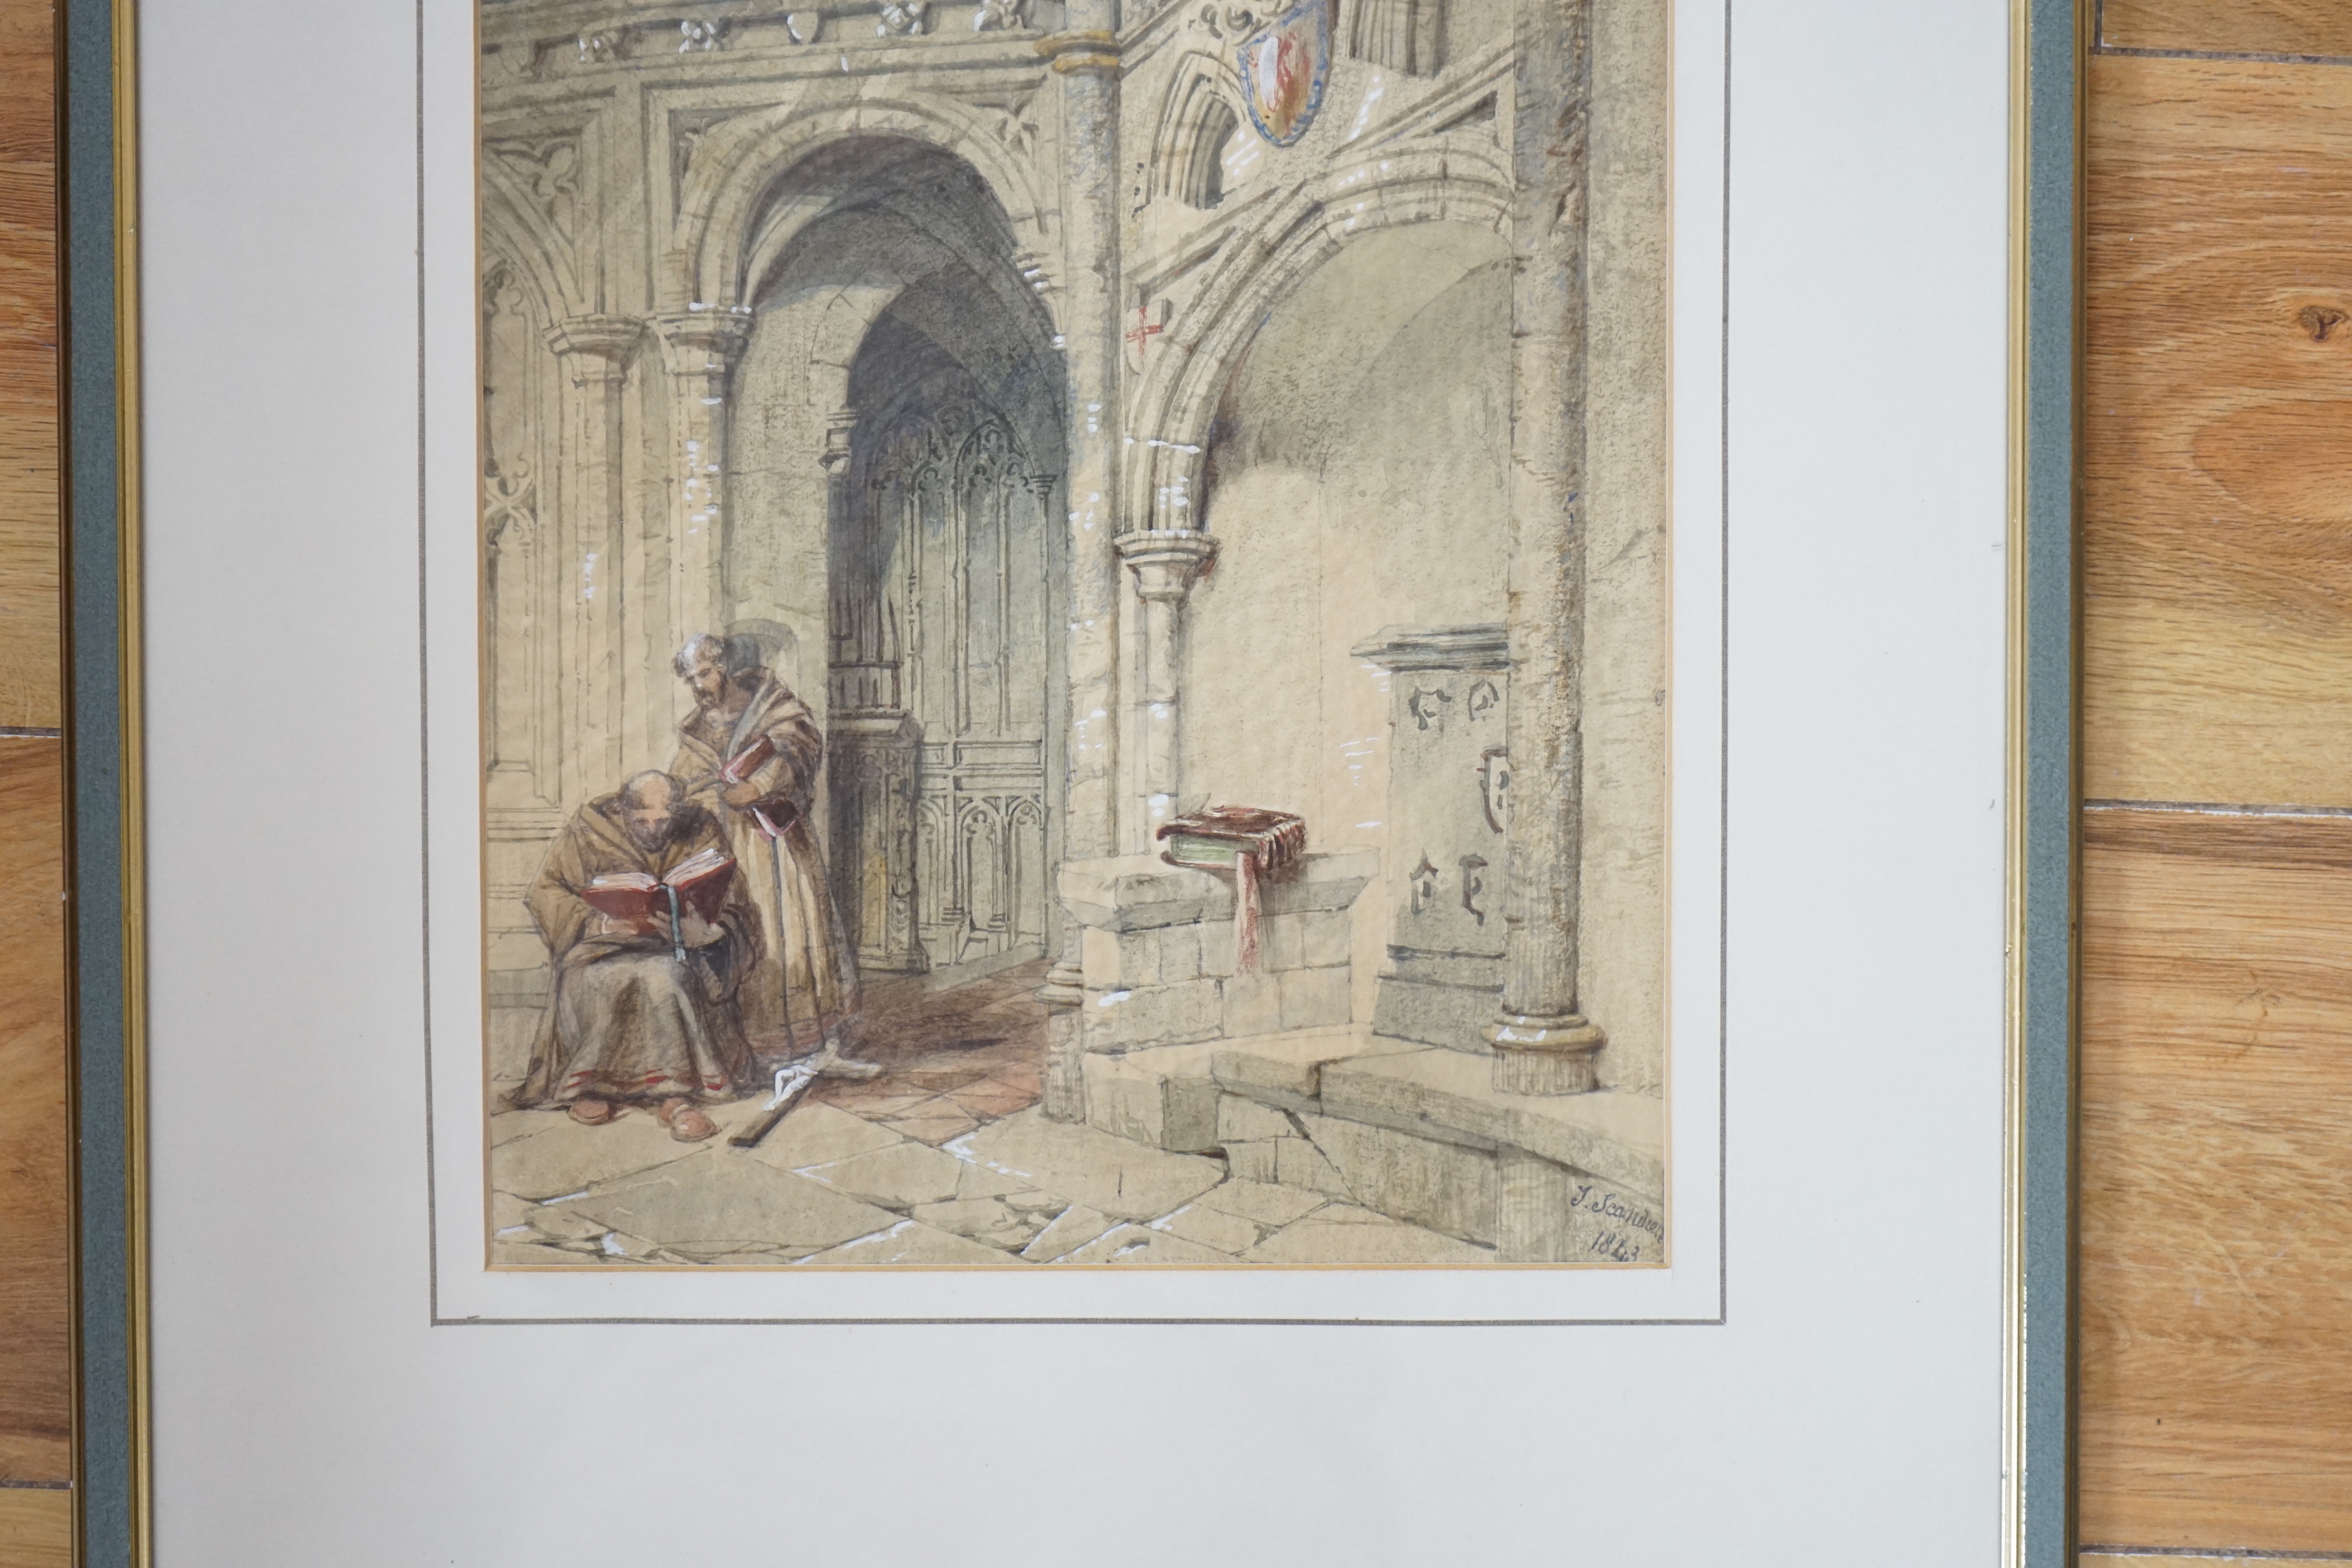 Thomas Scandrett (1797-1870), heightened watercolour, Two monks in an ecclesiastical setting, signed and dated 1843, 34 x 24cm